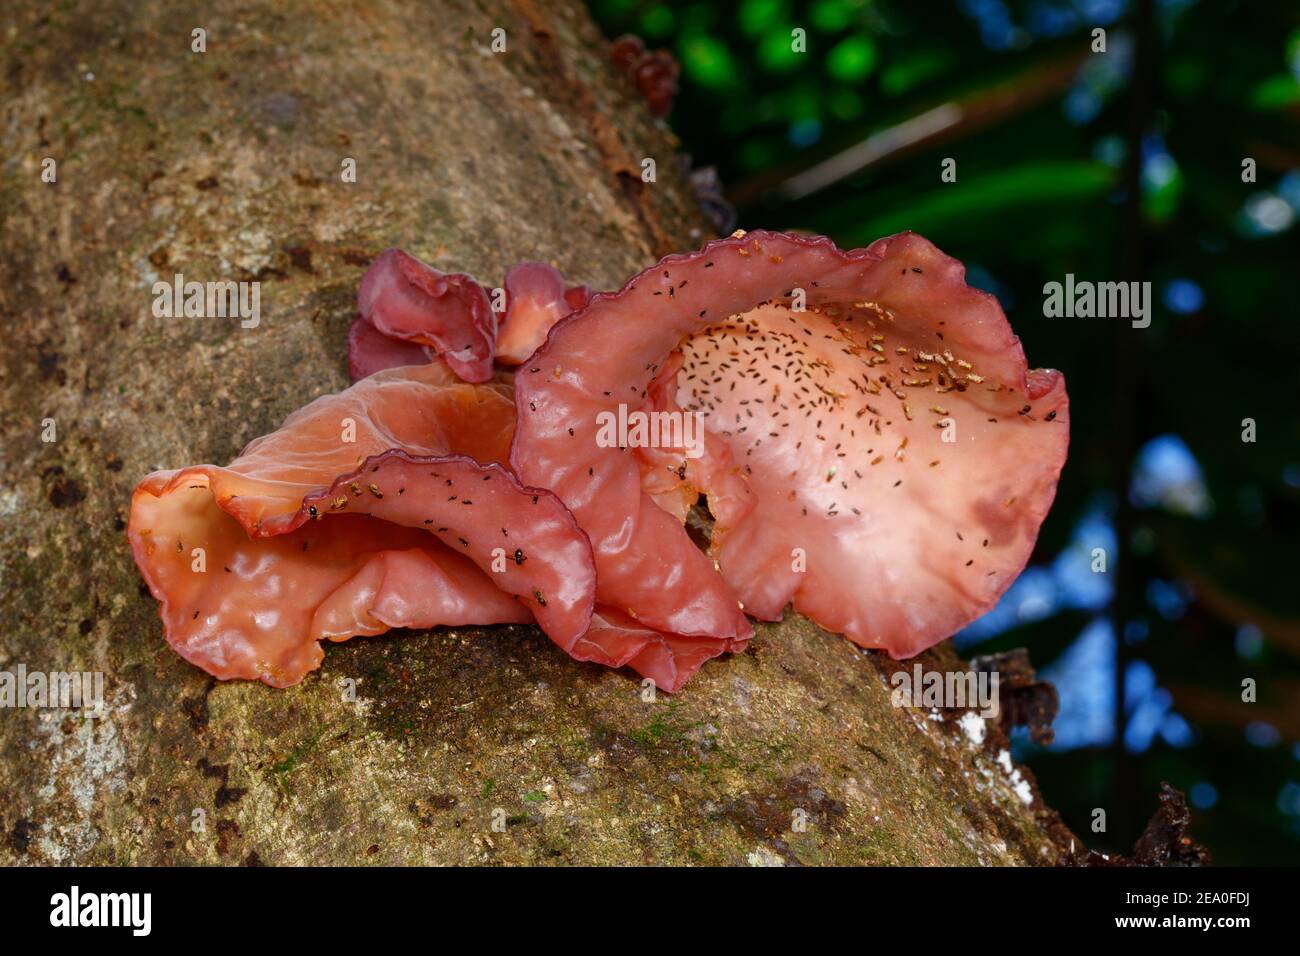 An unusual fungi with fruit flies on a tree trunk. Stock Photo